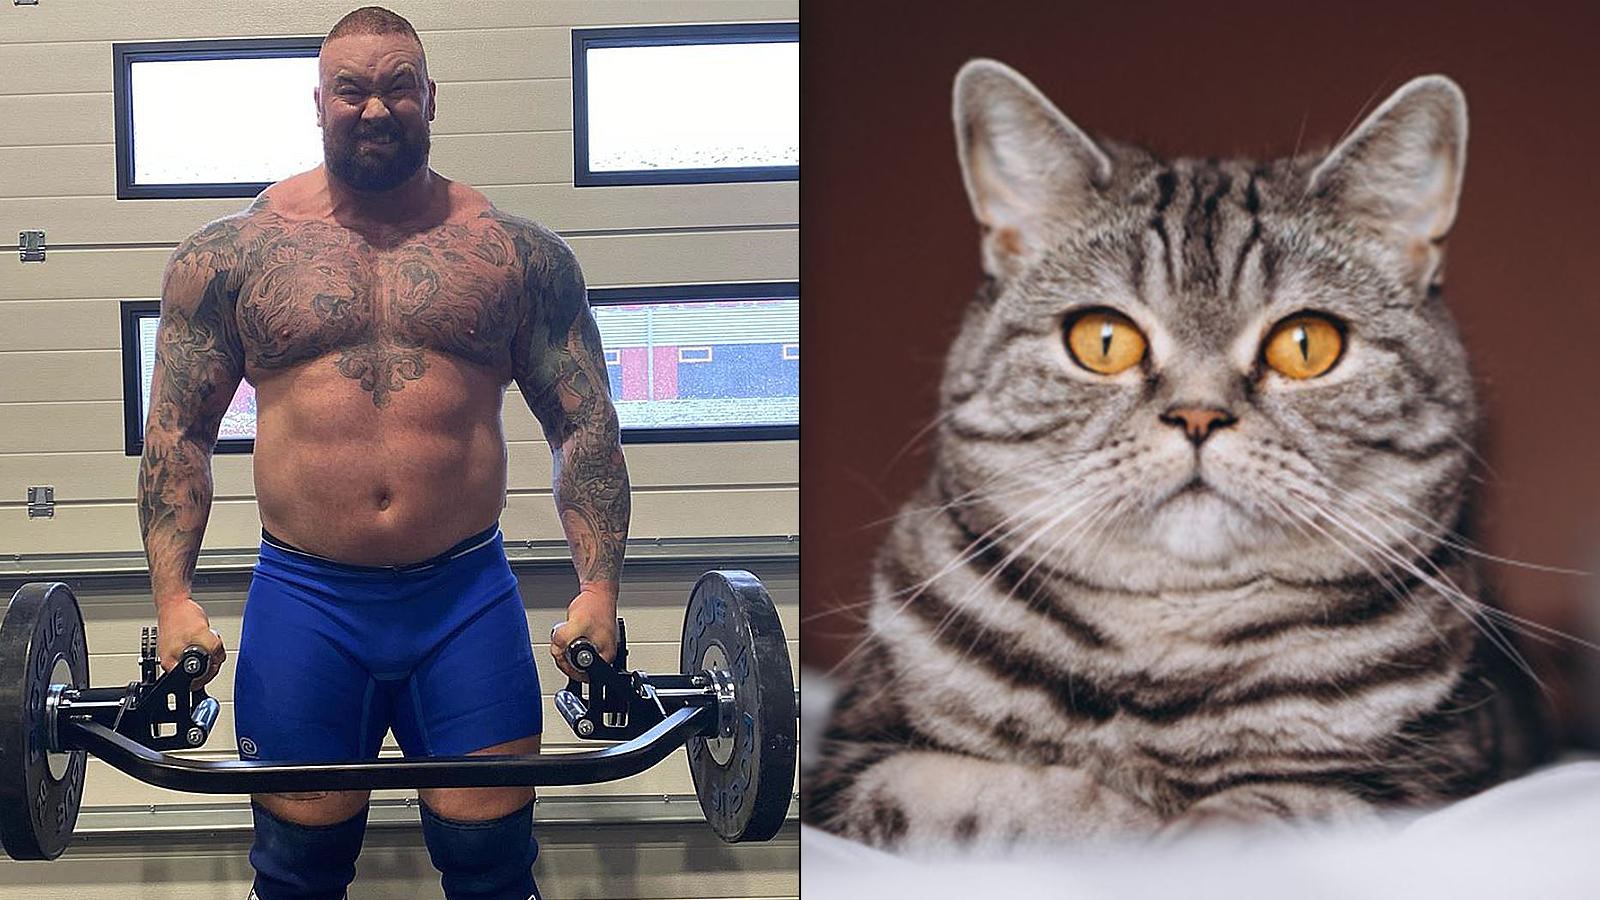 The Mountain thanks Twitch chat for saving his cat